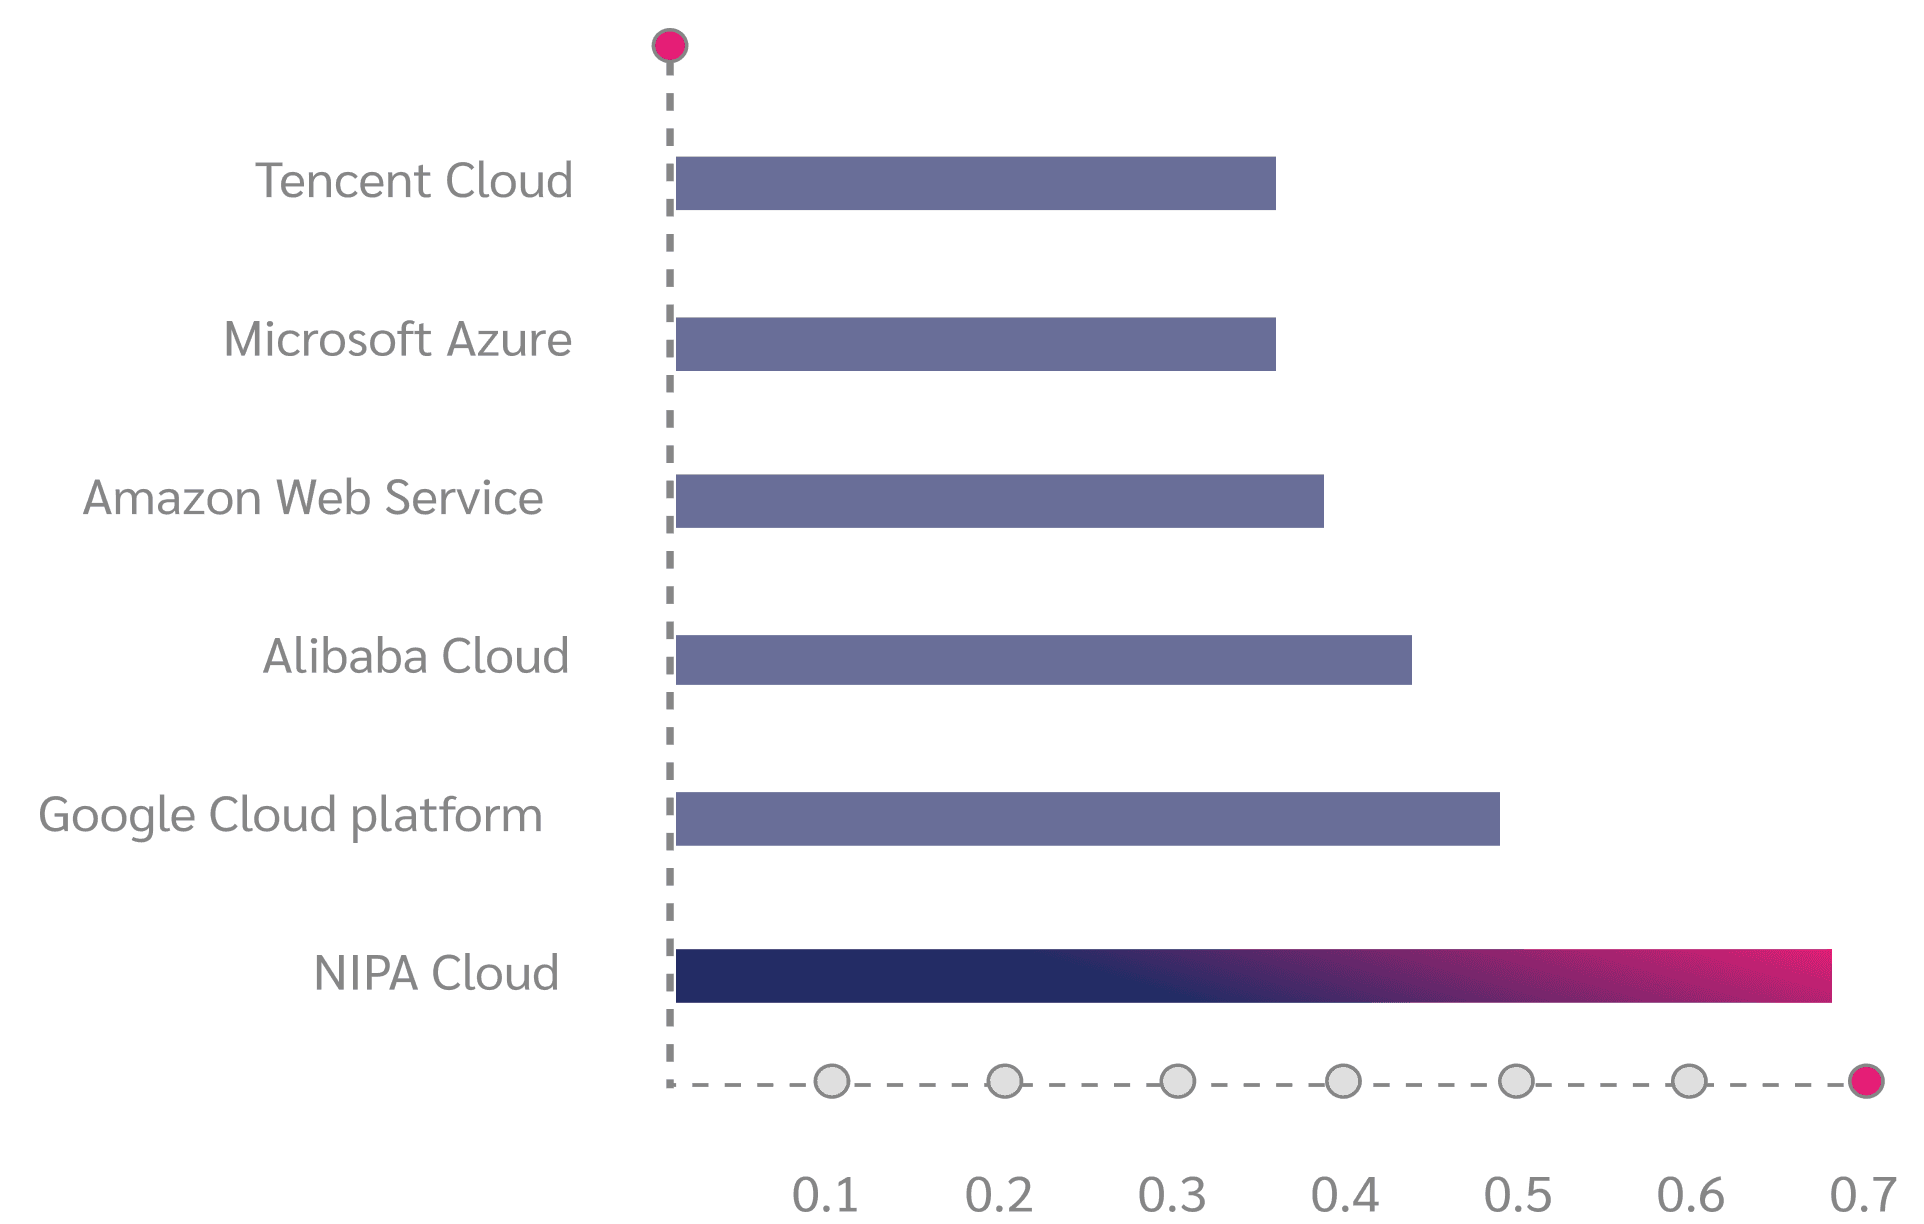 The price performance of NIPA Cloud's instance comparing to other cloud providers